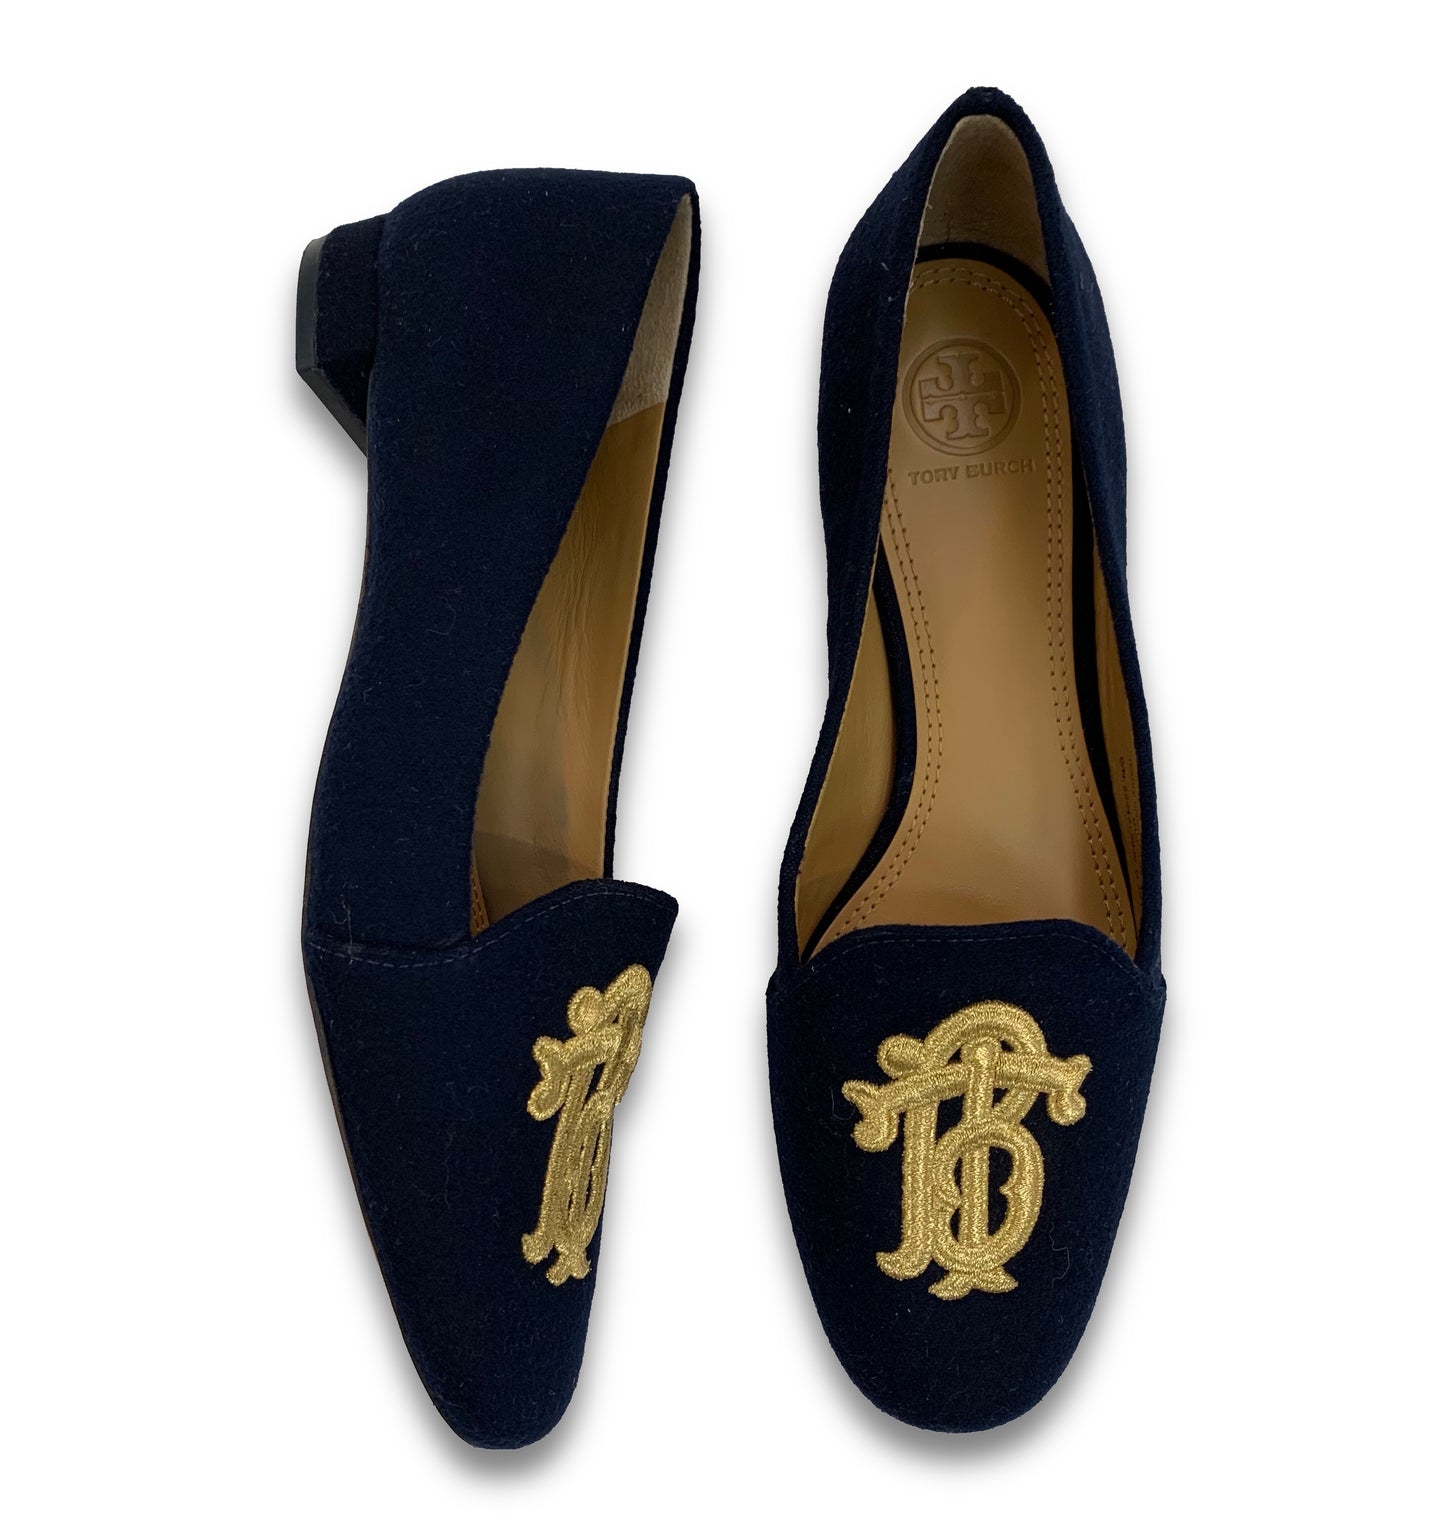 TORY BURCH Suede Embroidered Flats Navy Size 7